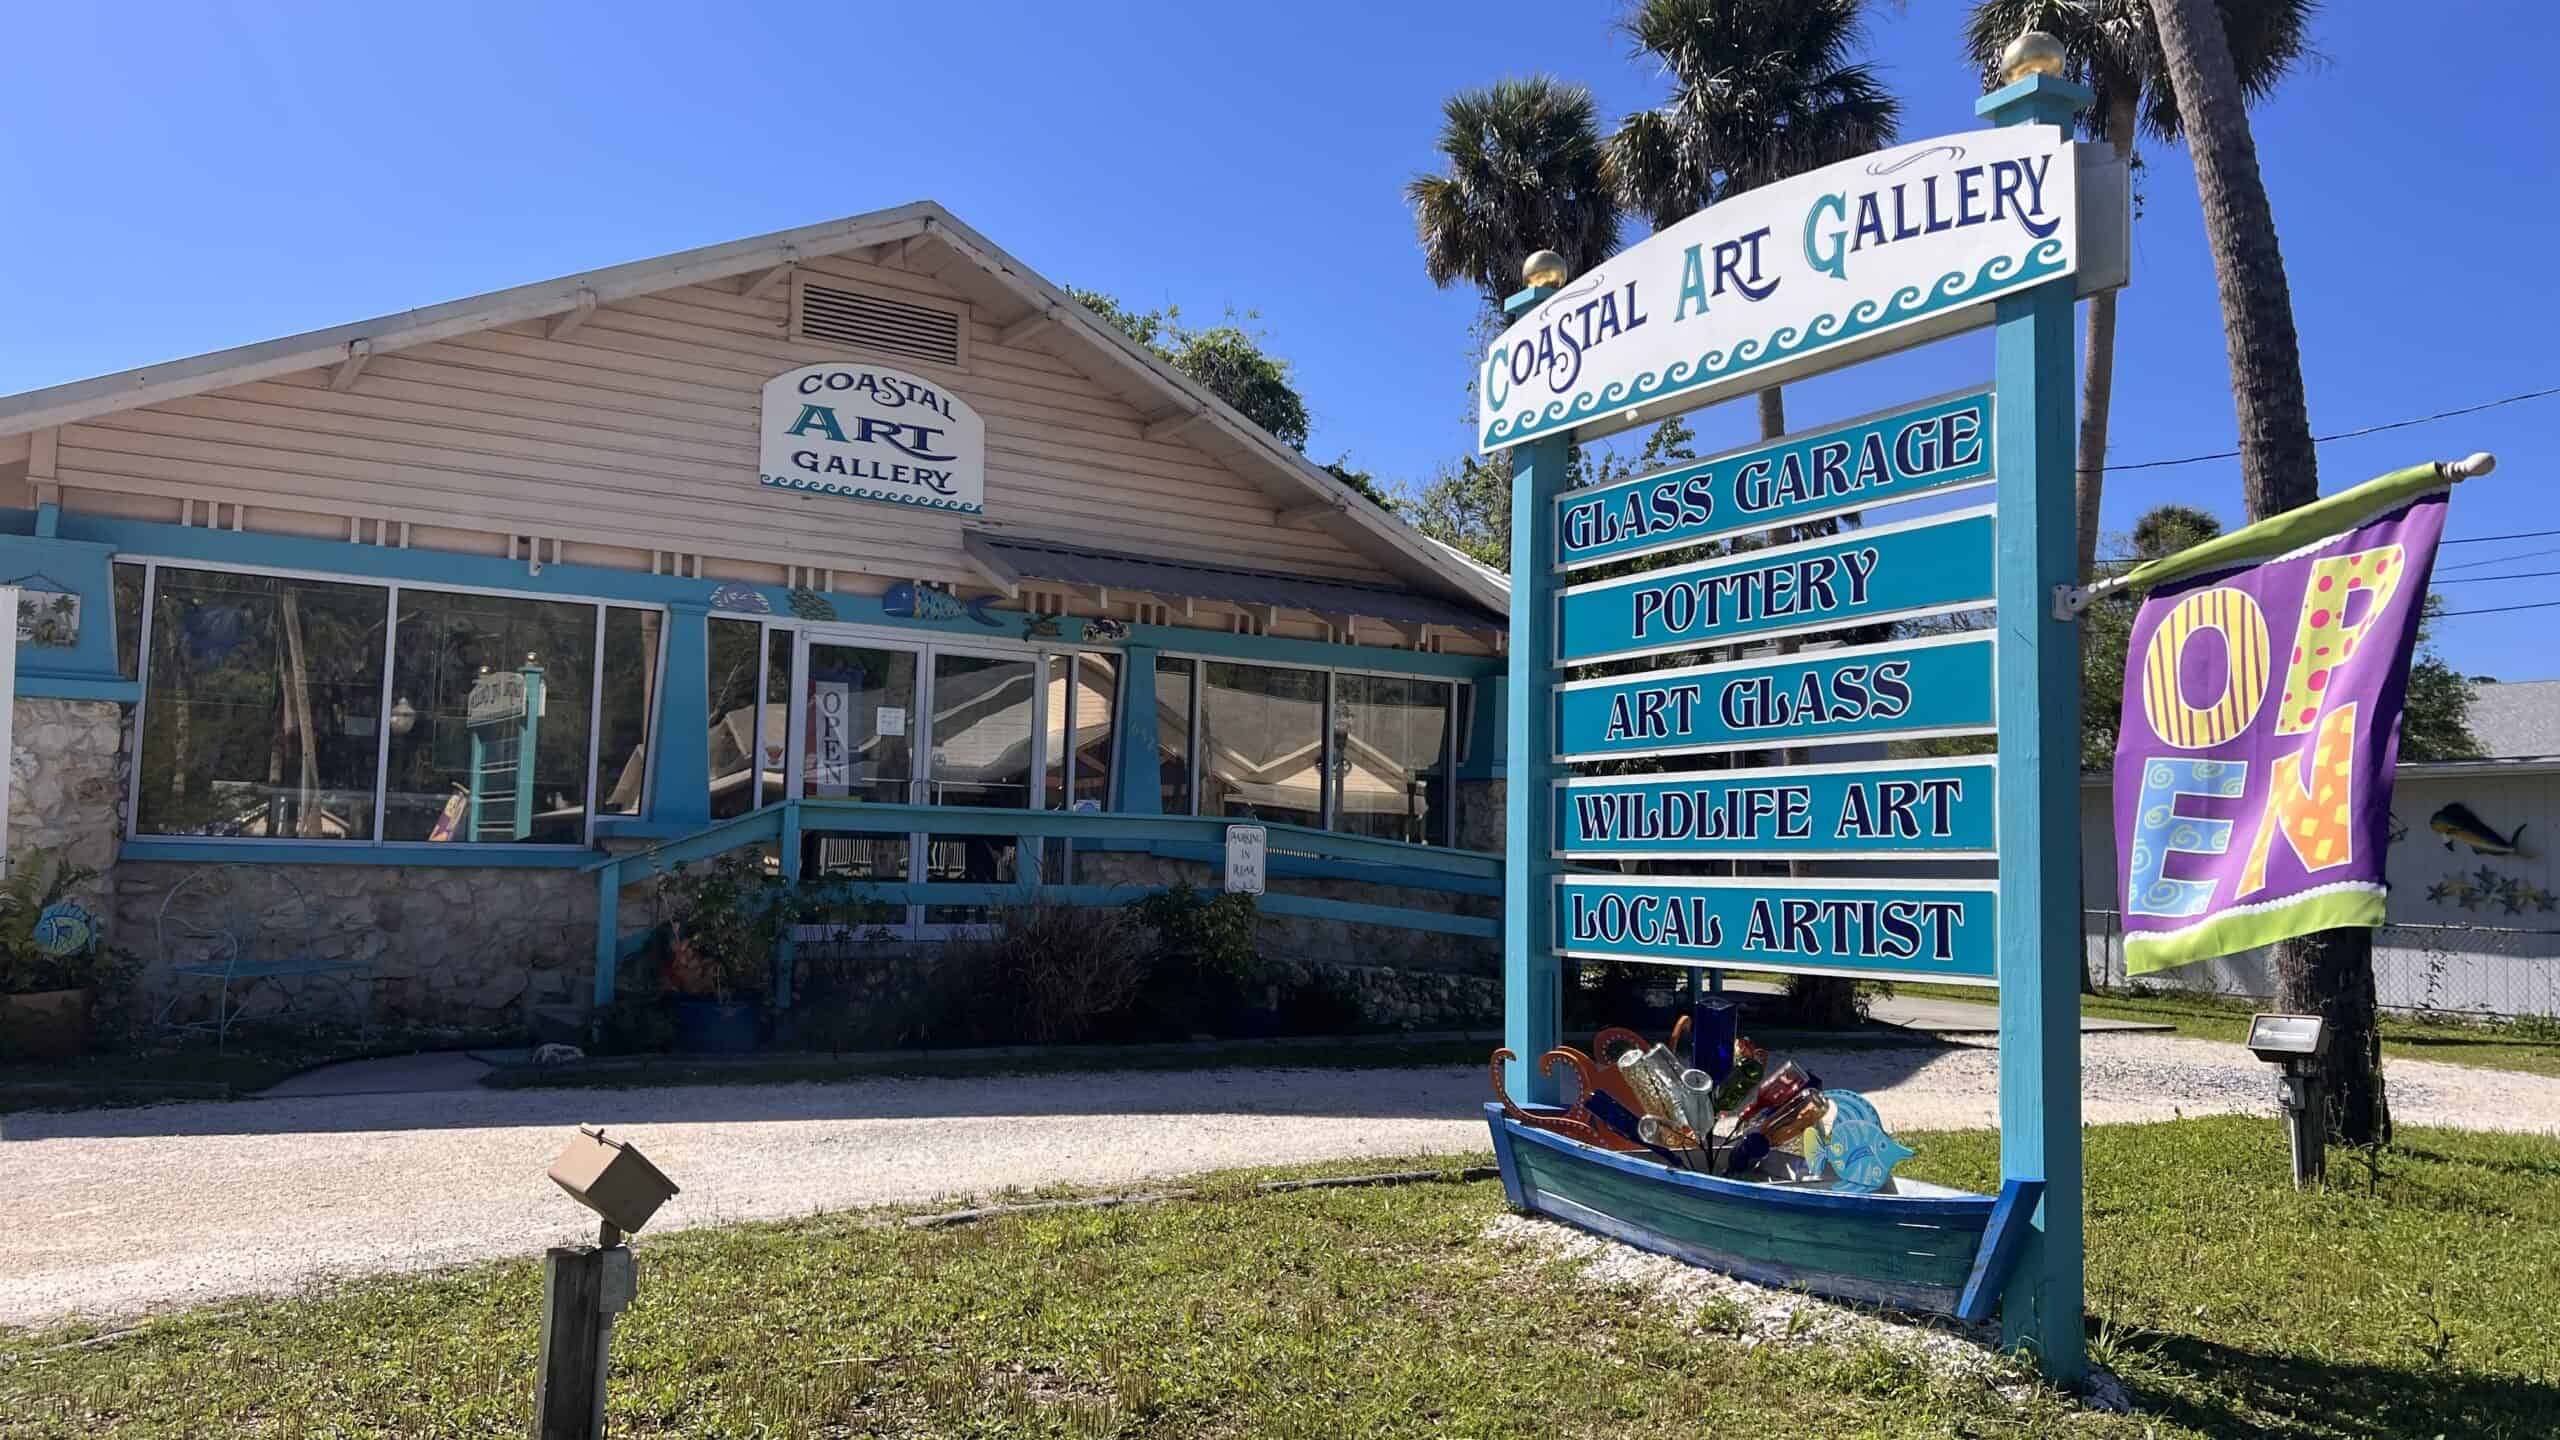 The Coastal Art Gallery in Crystal River the shoppes of heritage village a hidden gem in crystal river.